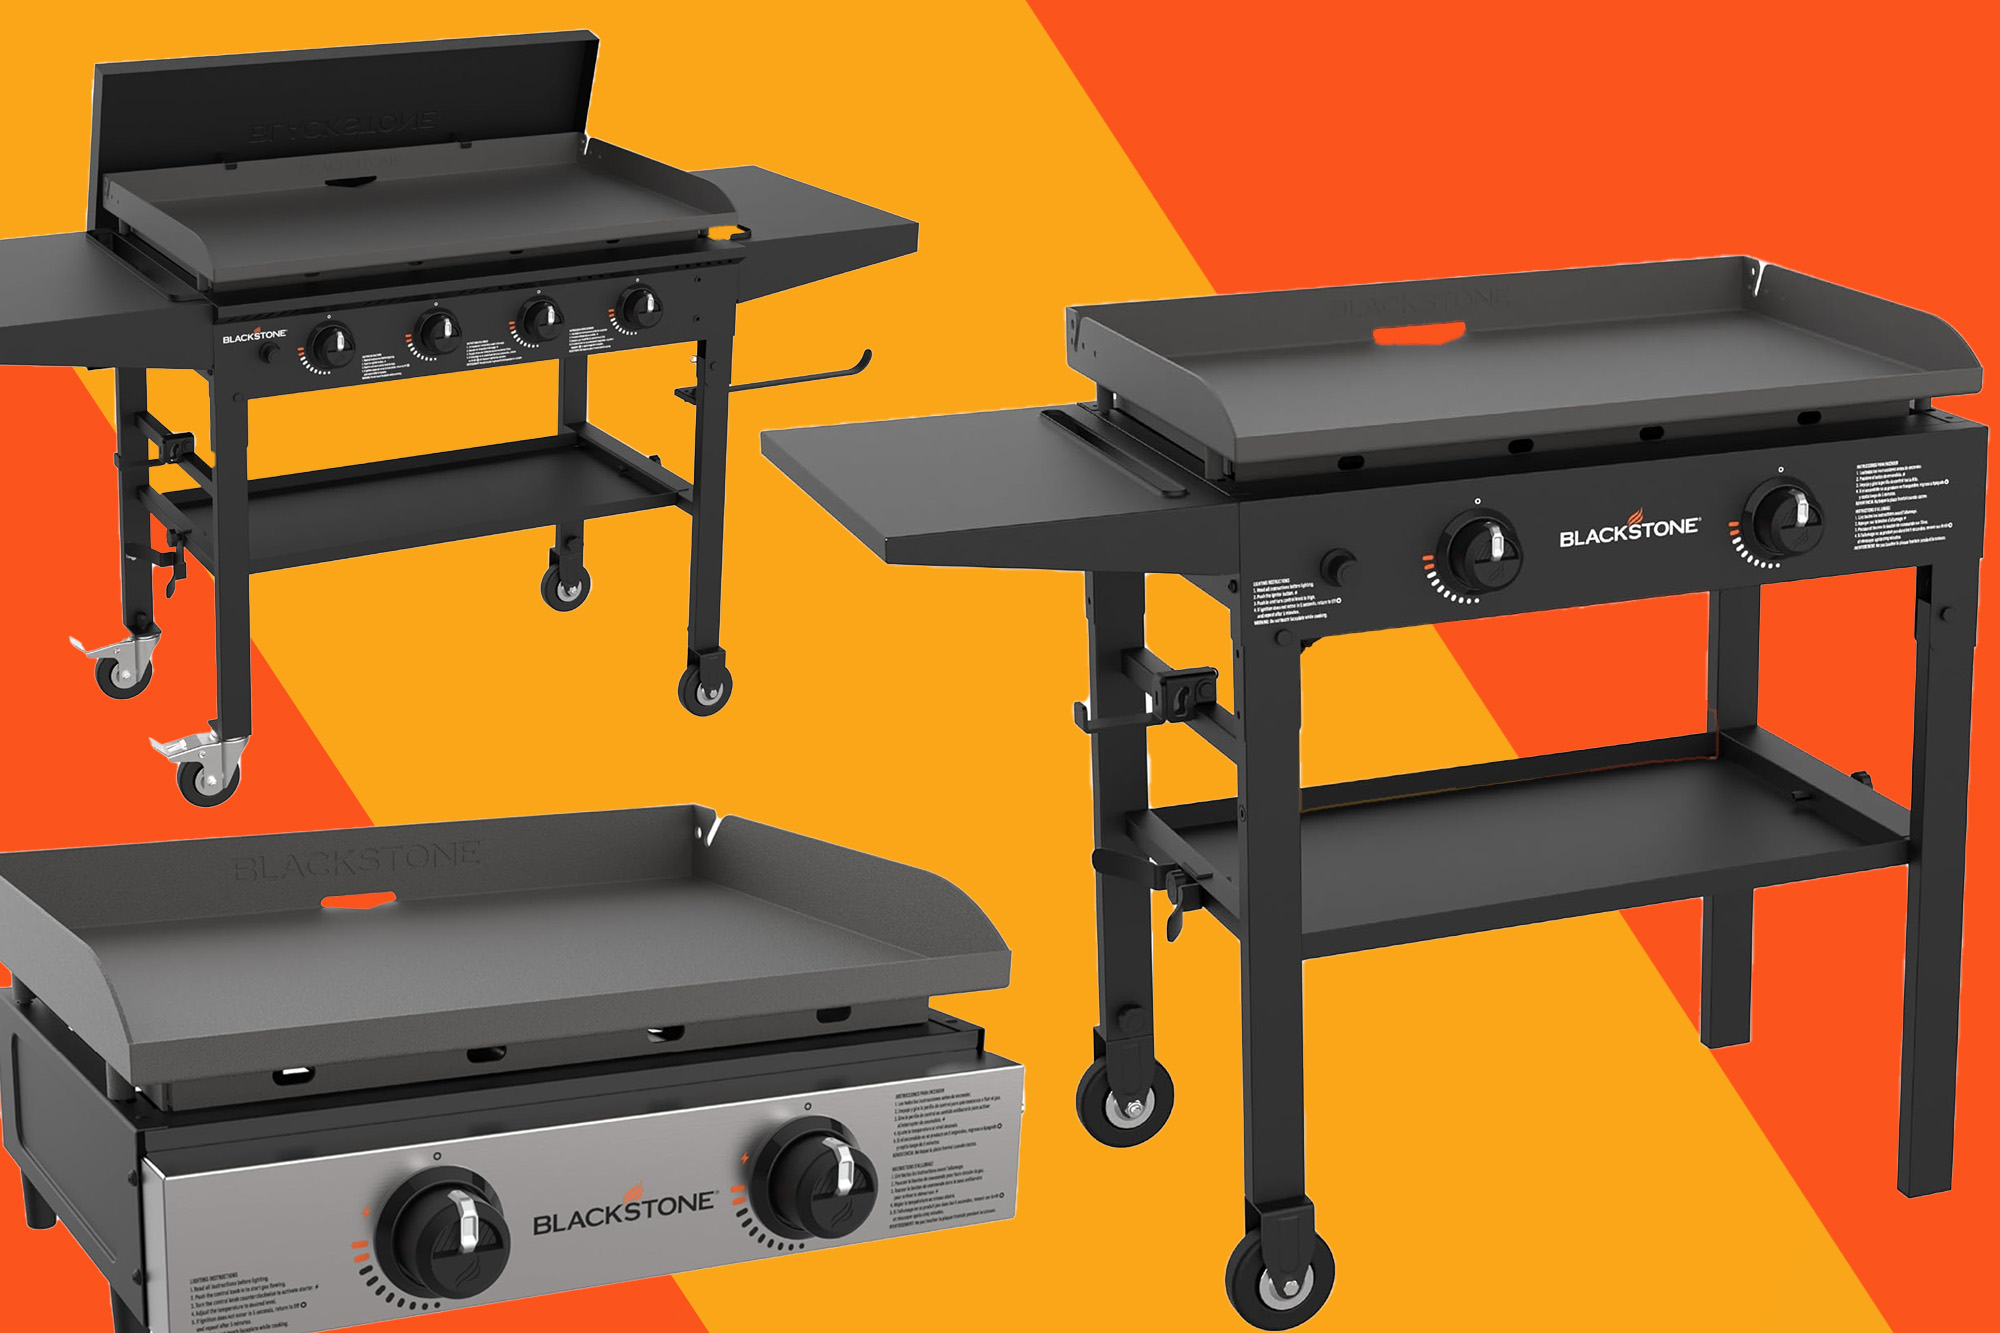 Save up to $100 on bestselling Blackstone Grills and Griddles right now